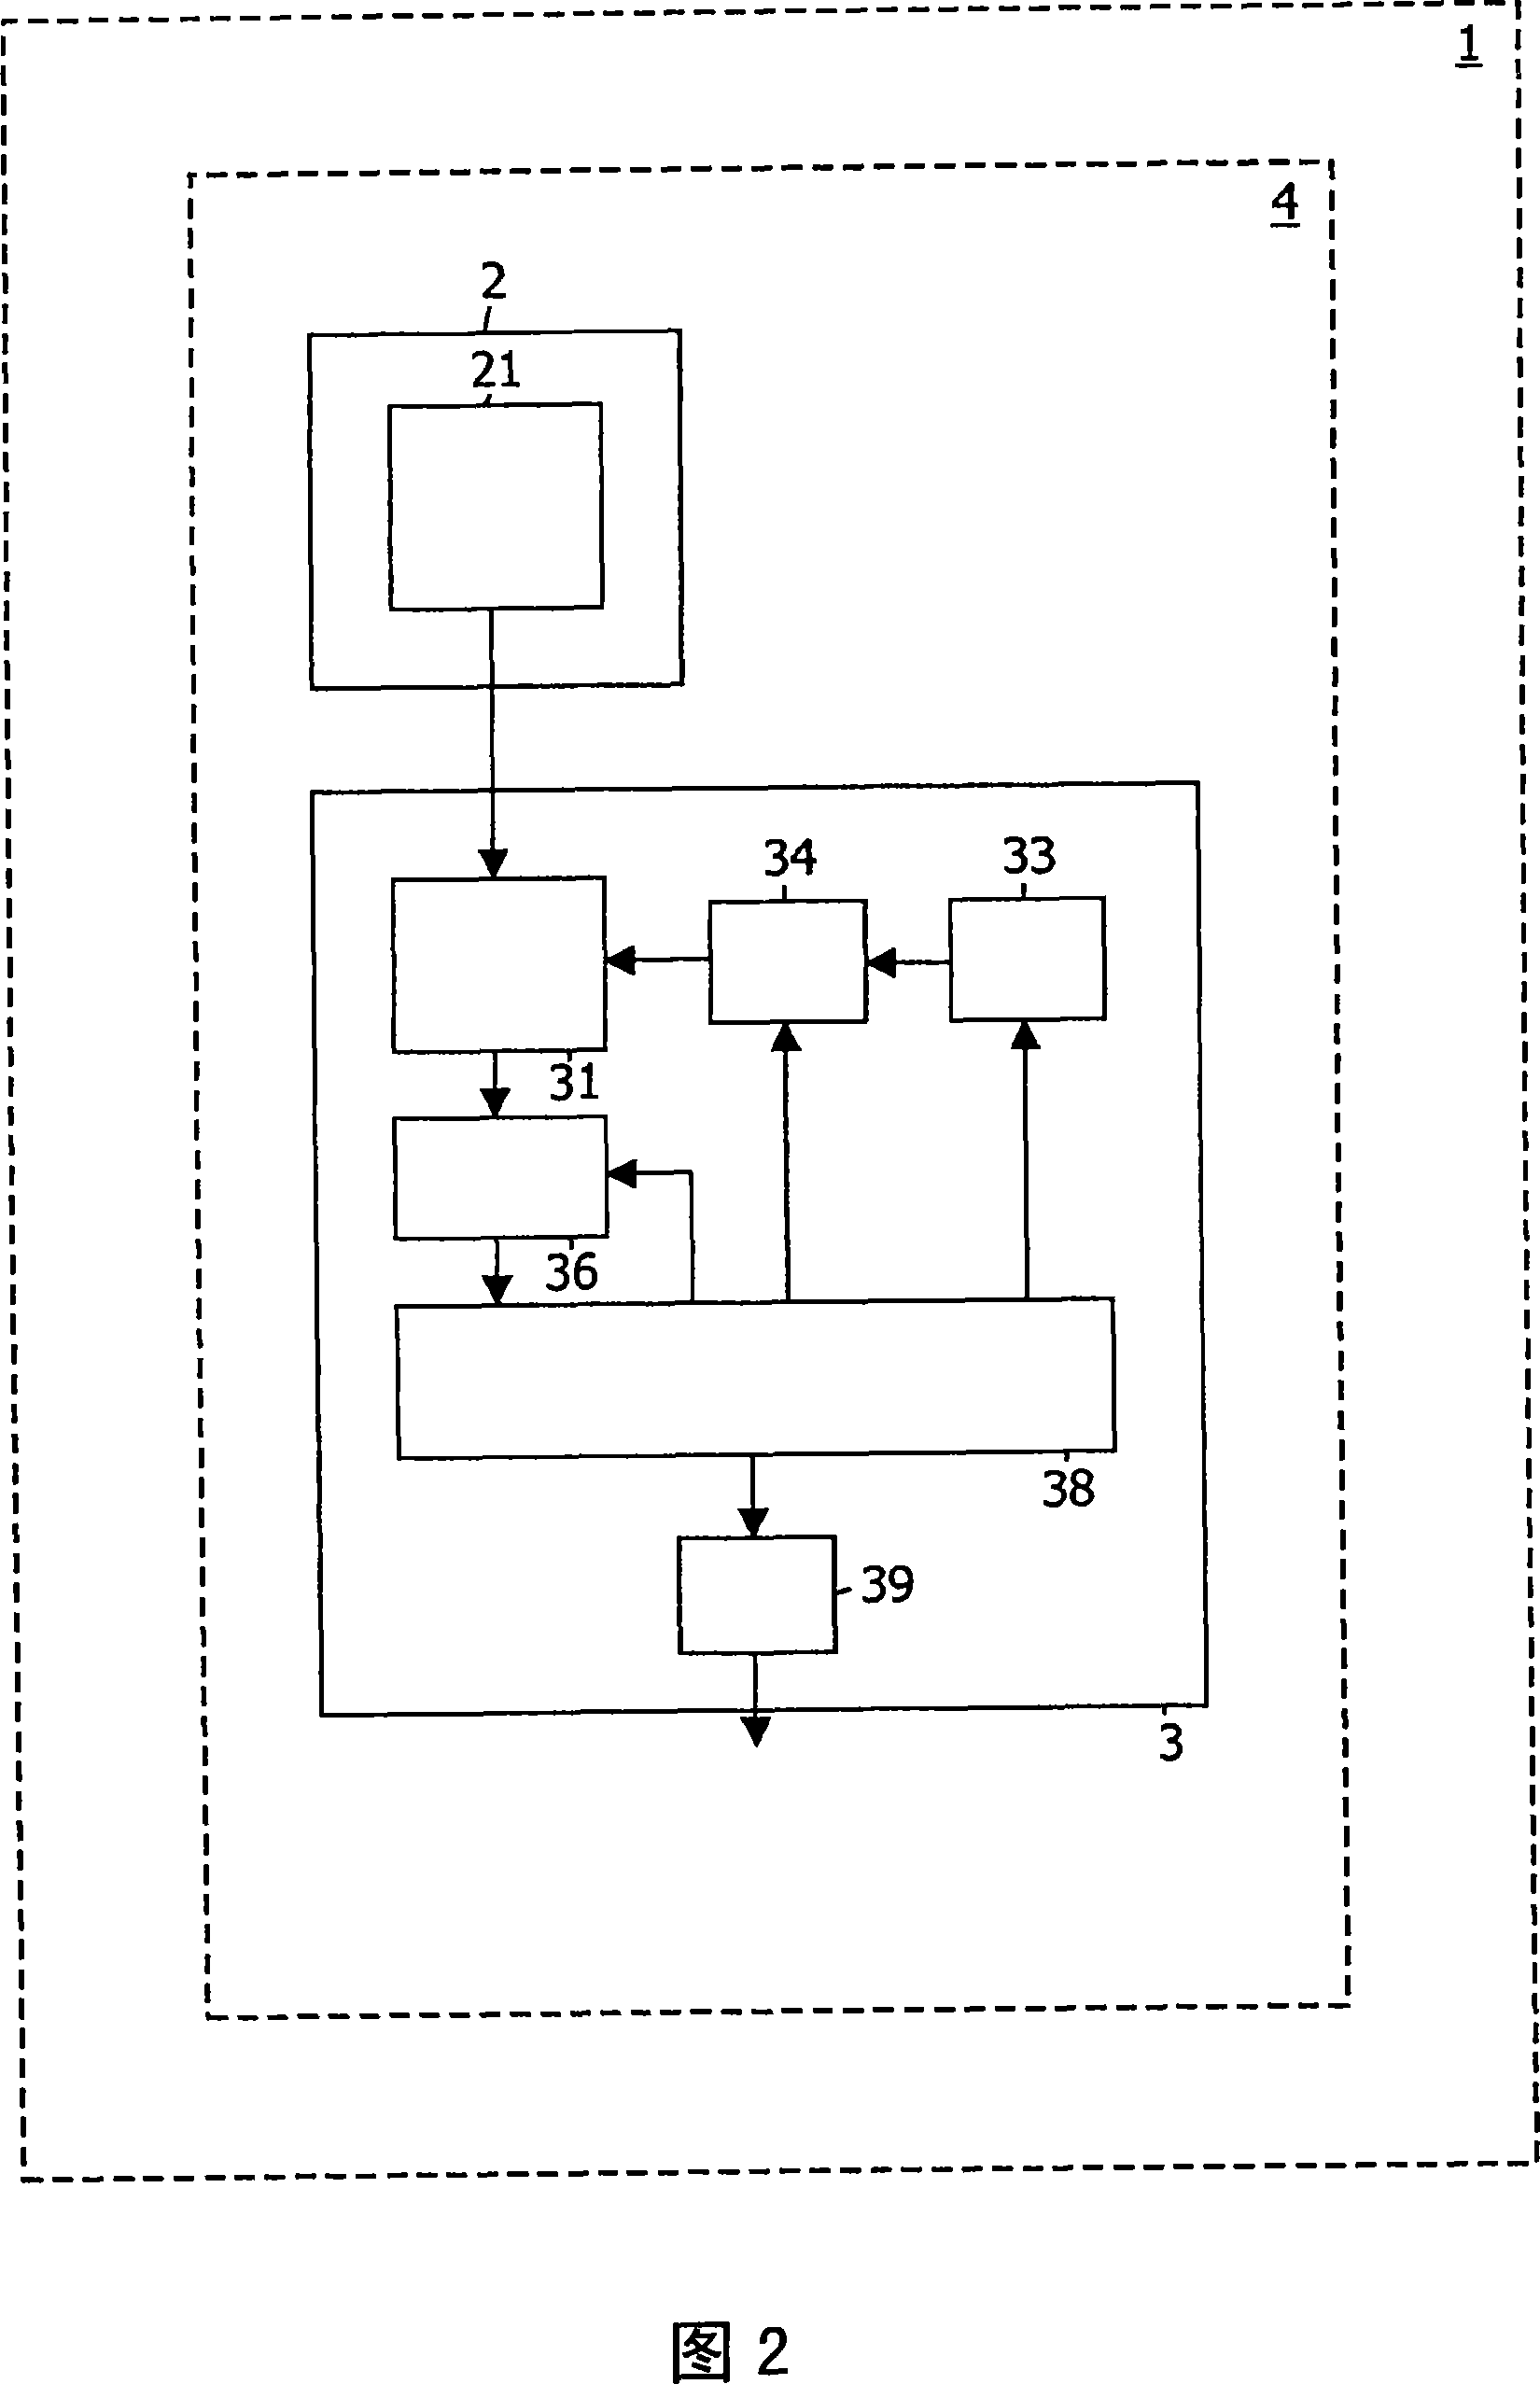 System comprising a generating device and a comparing device